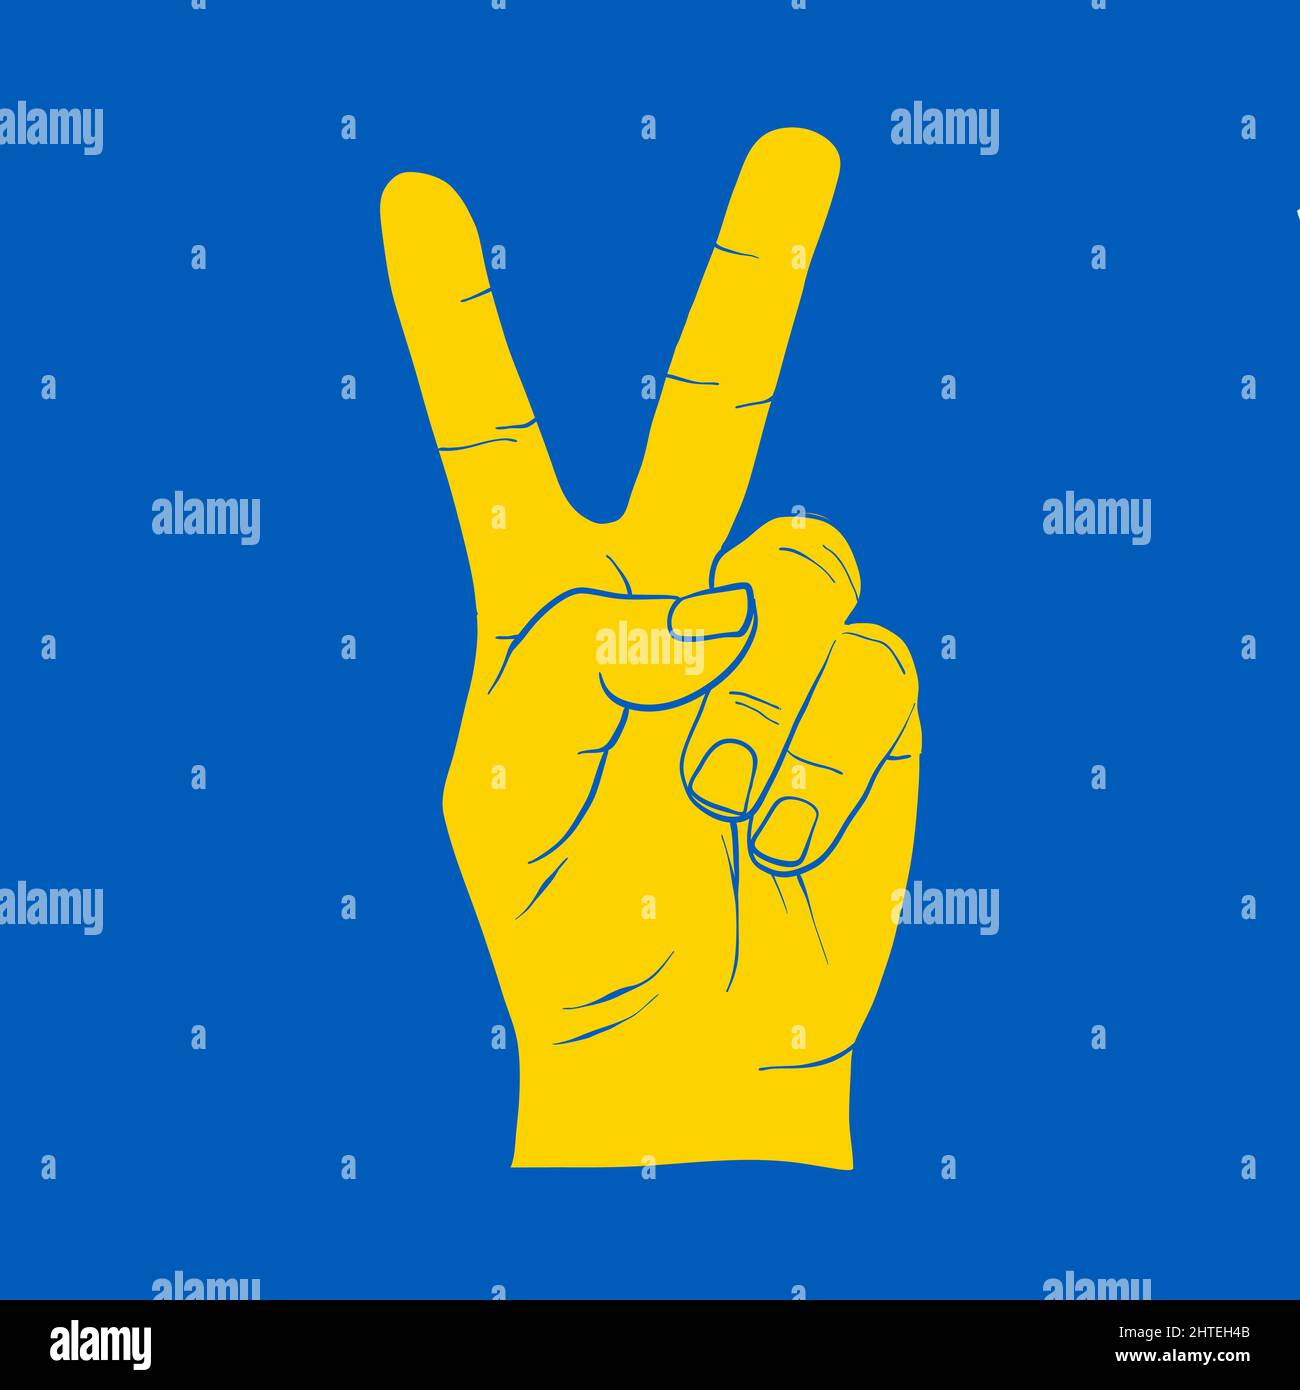 Yellow Peace hand symbol freedom for ukraine on blue. Support icon for Kyiv and Ukraine people. Stay Strong together. Patriotic symbol, icon.-Suppleme Stock Vector